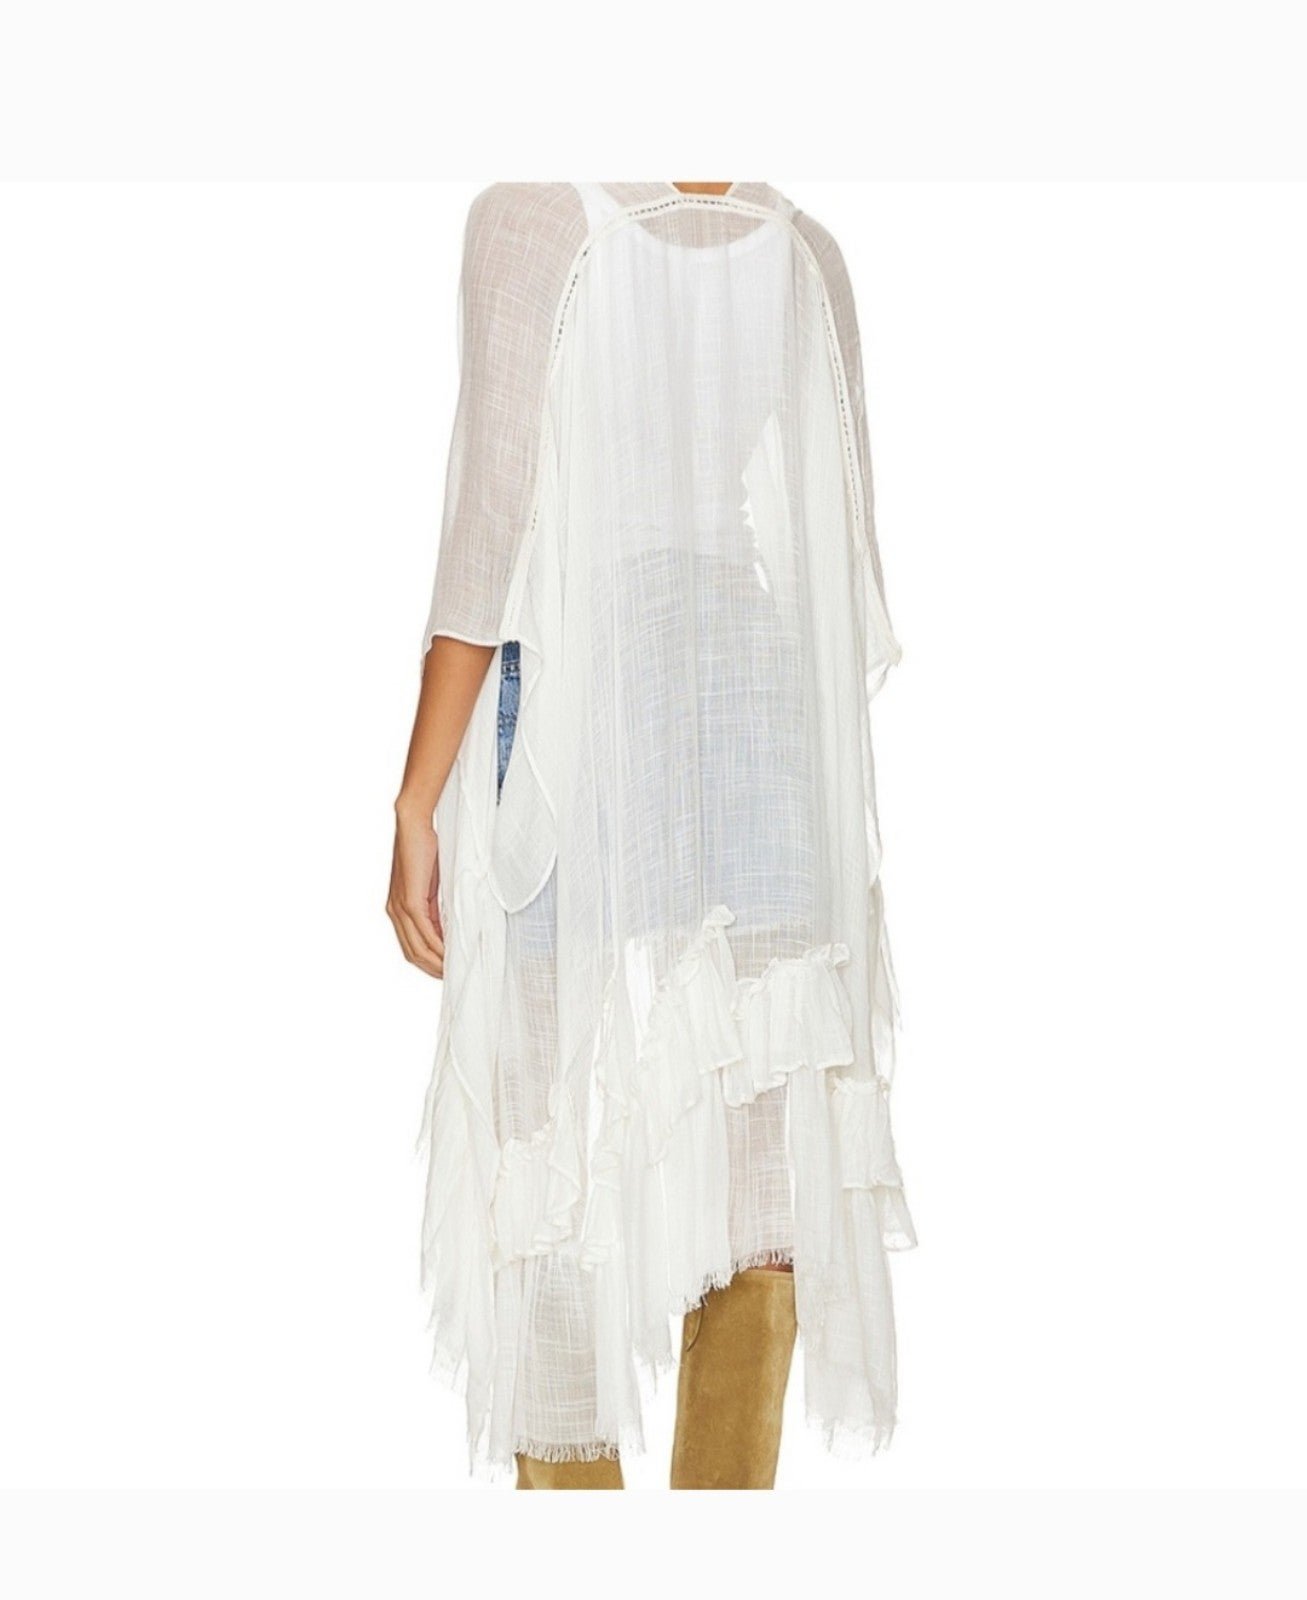 Latest  Free People Whisper Washed White Kimono Wrap In One Size Fits Most NWT Gxtj6z29O Cheap